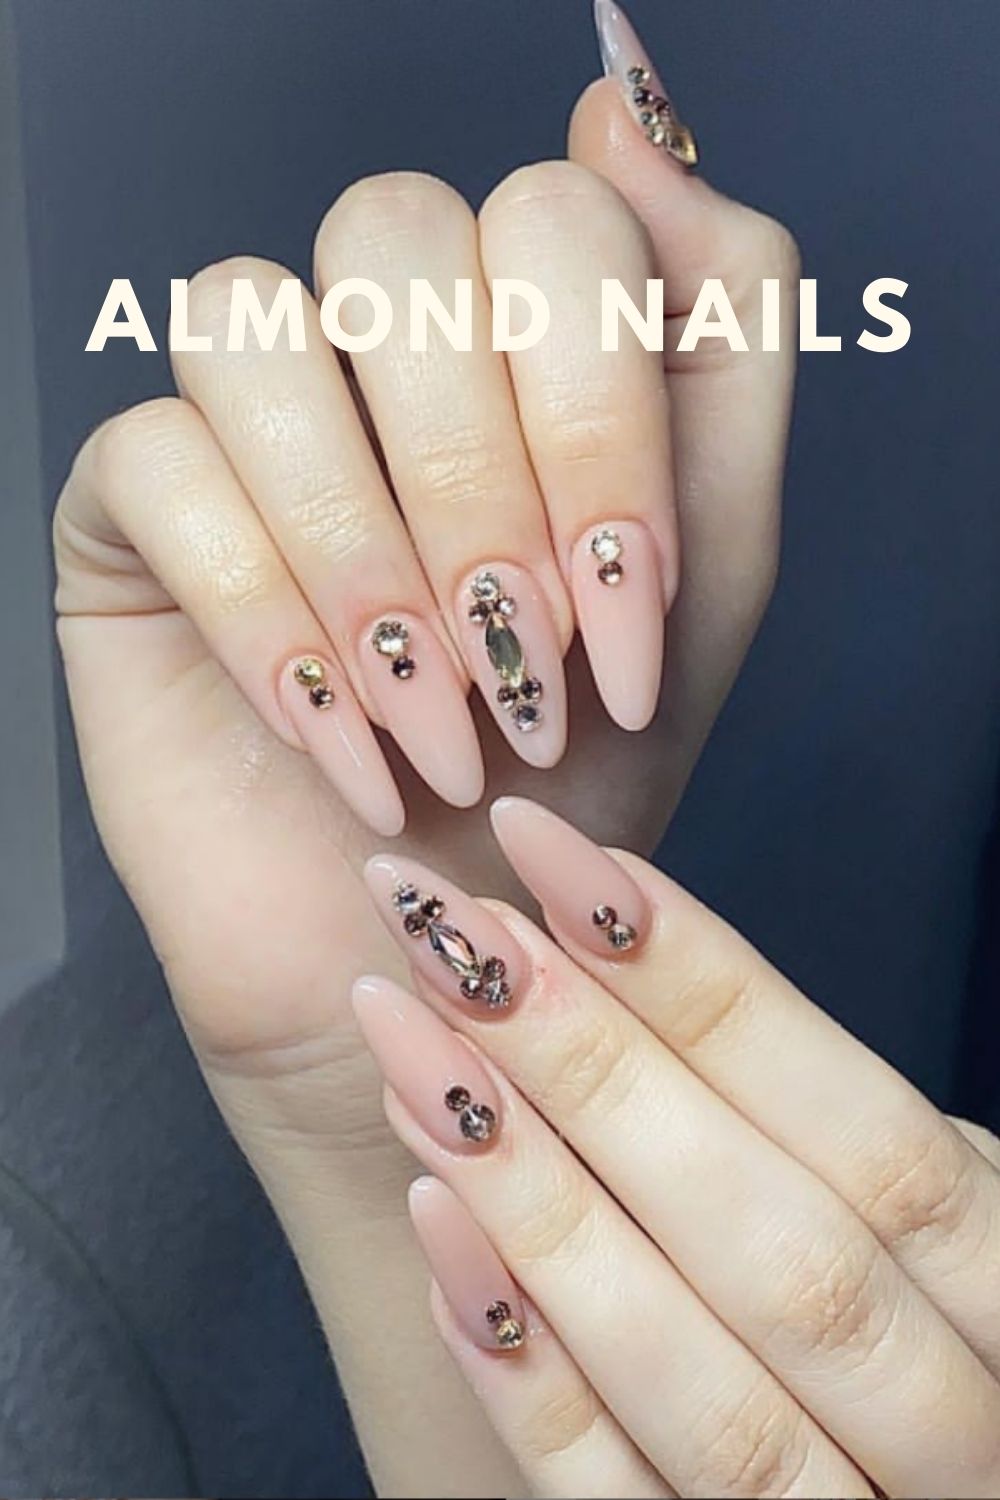 Almond-Shaped Nails Art for Autumn Nails 2021